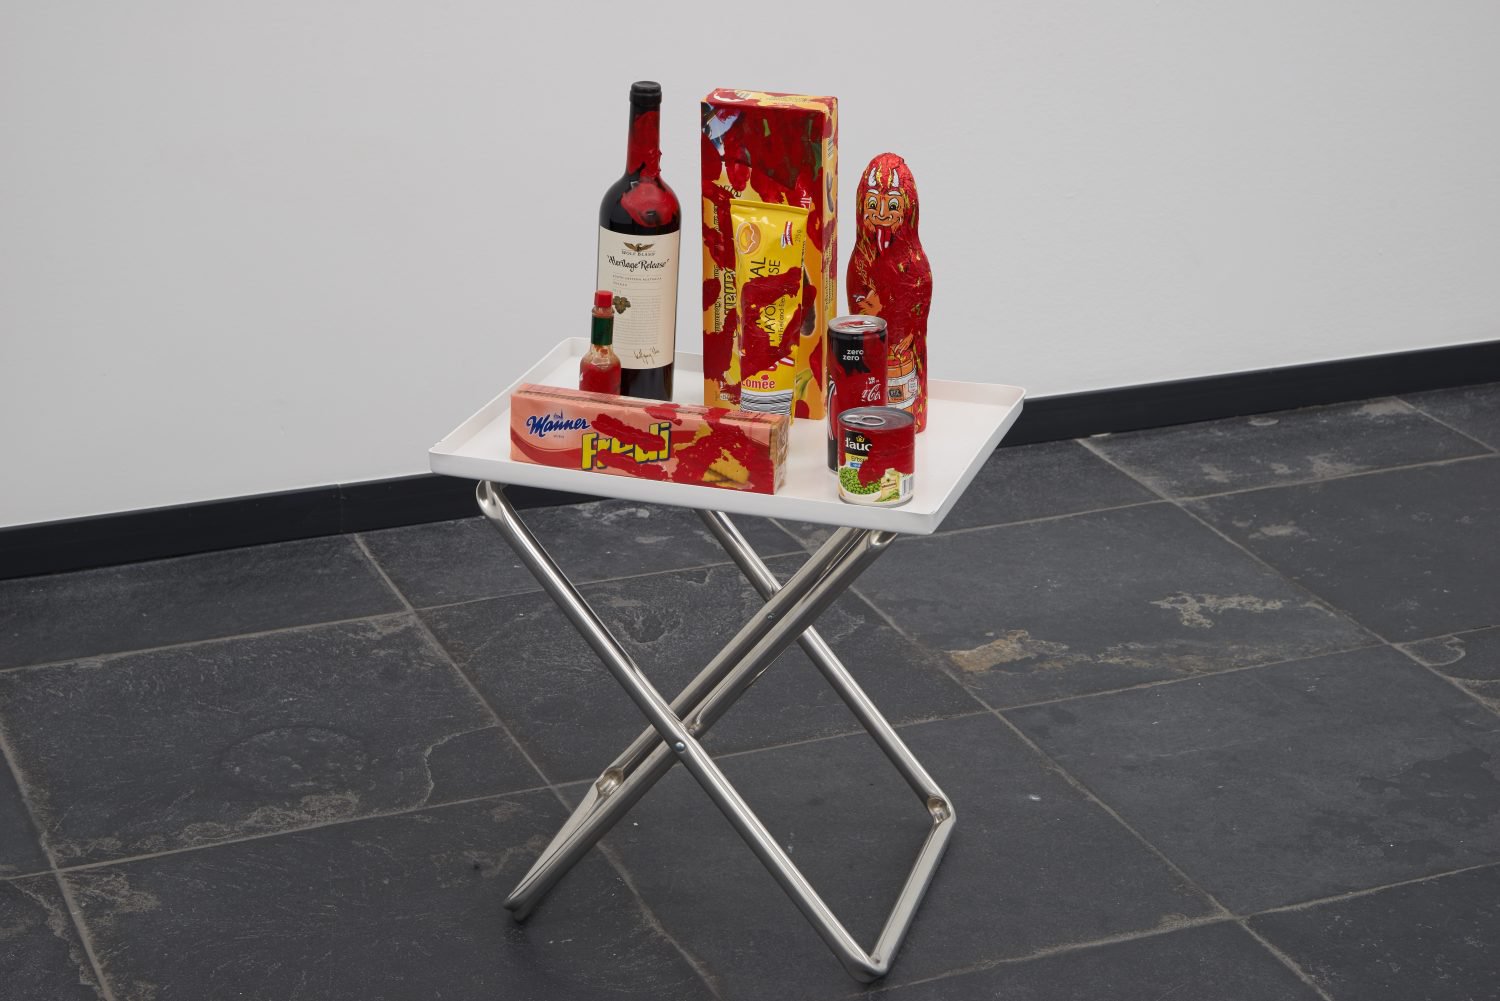 Anna-Sophie BergerComplicit 1Acrylic paint on &quot;heritage release&quot; red wine bottle, chocolate bananas, mayonaise, chocolate krampus, coke zero, manner fredi biskuits, tabasco, PVC, aluminium and polyester70 x 46 x 36 cm